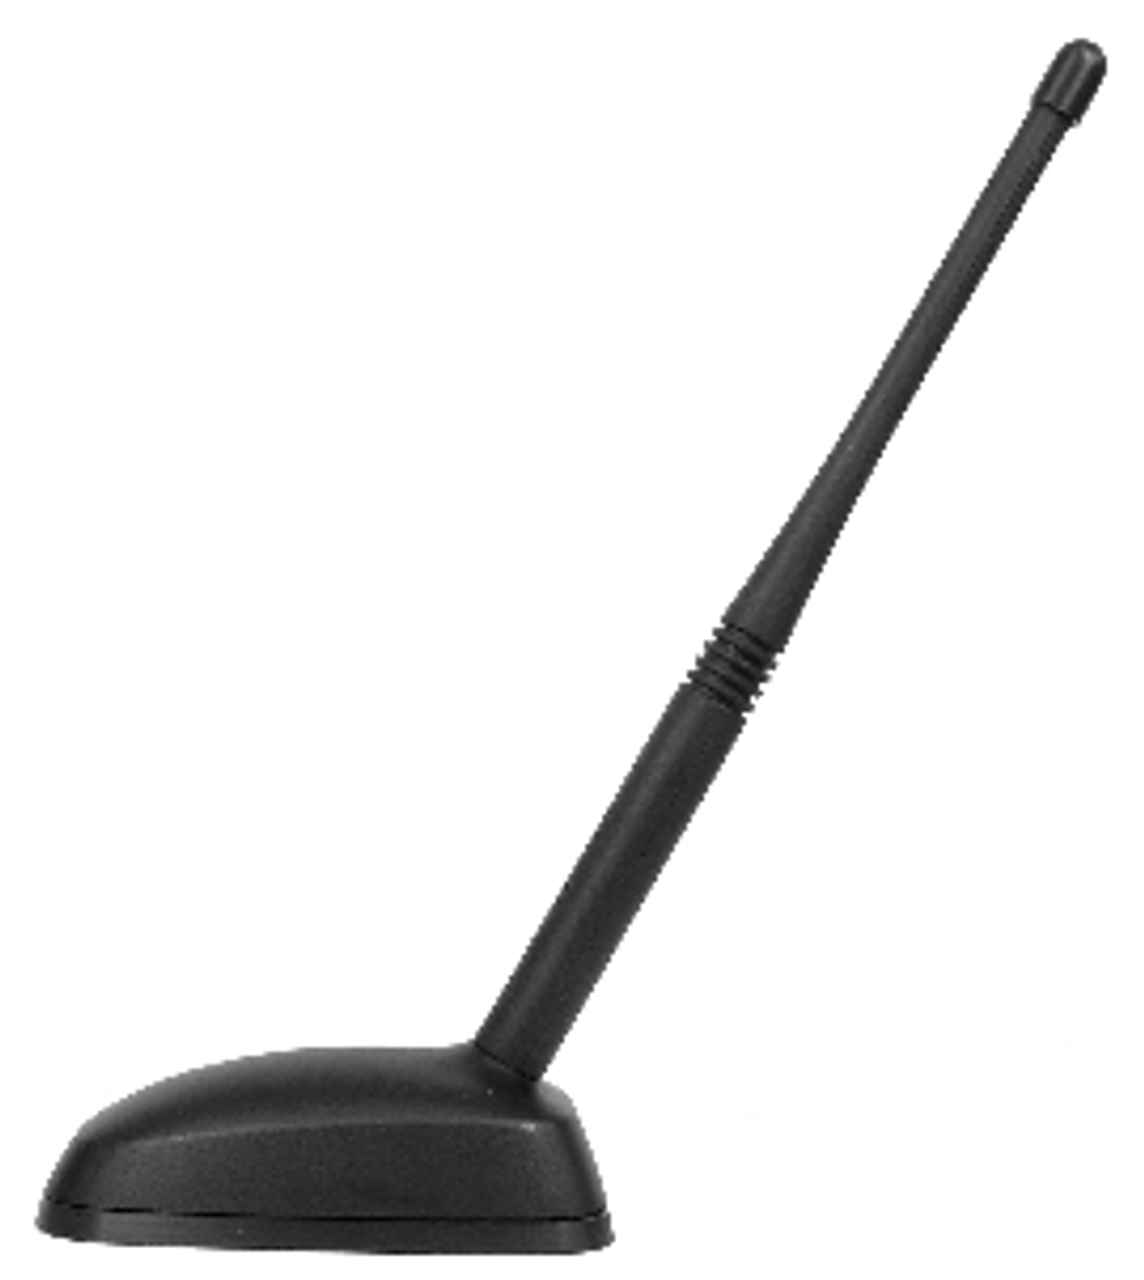 STI-CO - MMAS-BSSF-UHF - Plug 'n Play Antenna Covert Operations Magnet Mount Works With Your Portable Antenna Whip